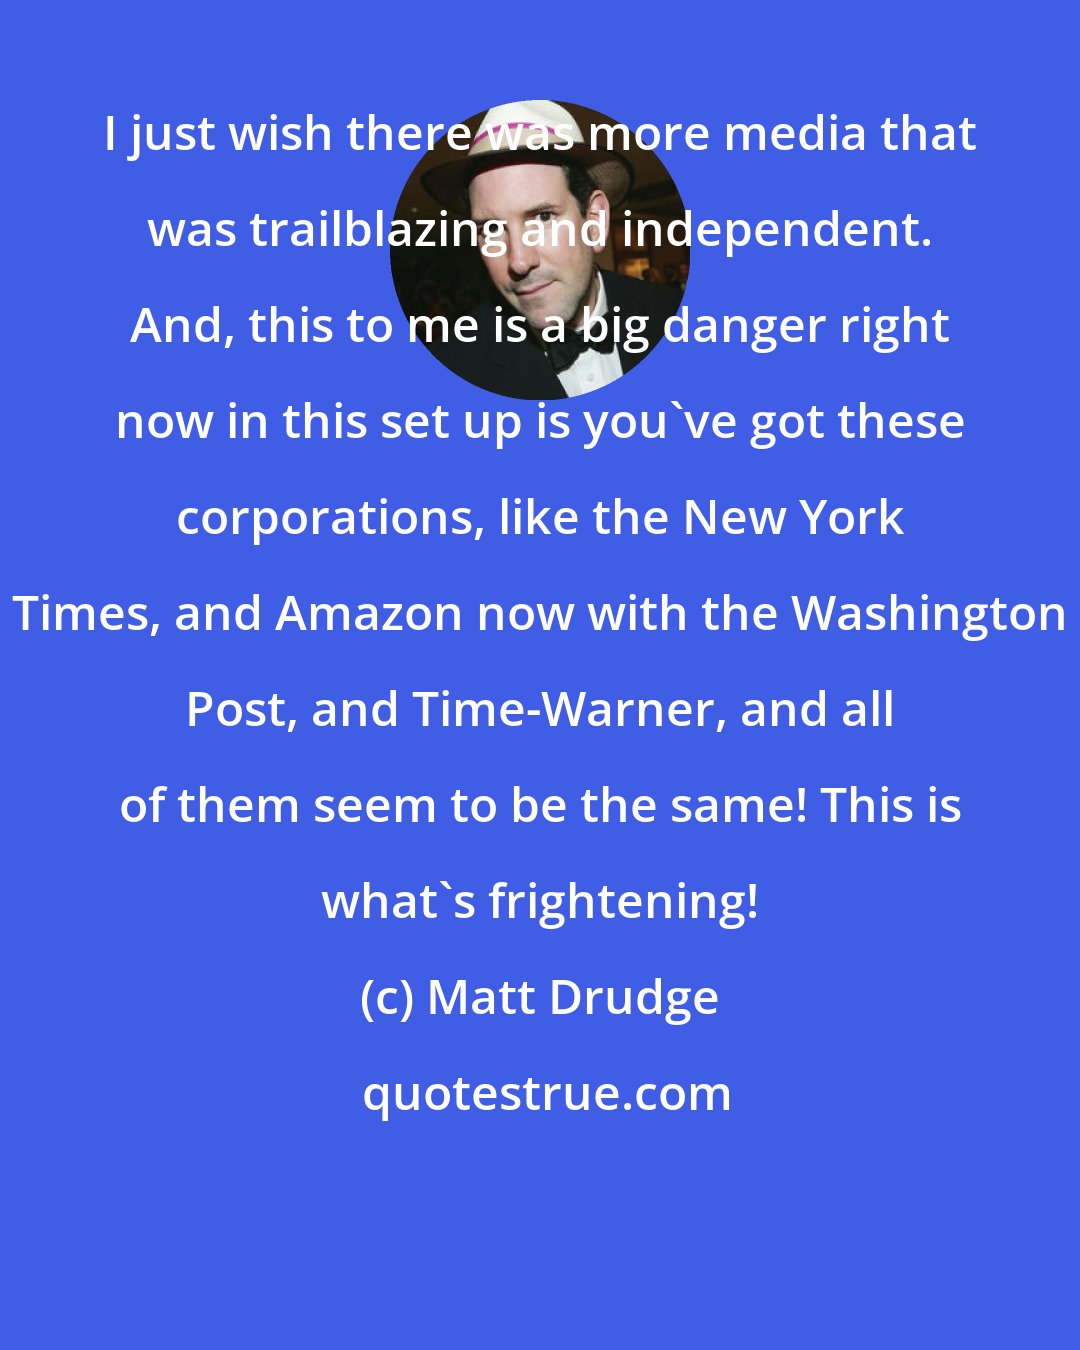 Matt Drudge: I just wish there was more media that was trailblazing and independent. And, this to me is a big danger right now in this set up is you've got these corporations, like the New York Times, and Amazon now with the Washington Post, and Time-Warner, and all of them seem to be the same! This is what's frightening!